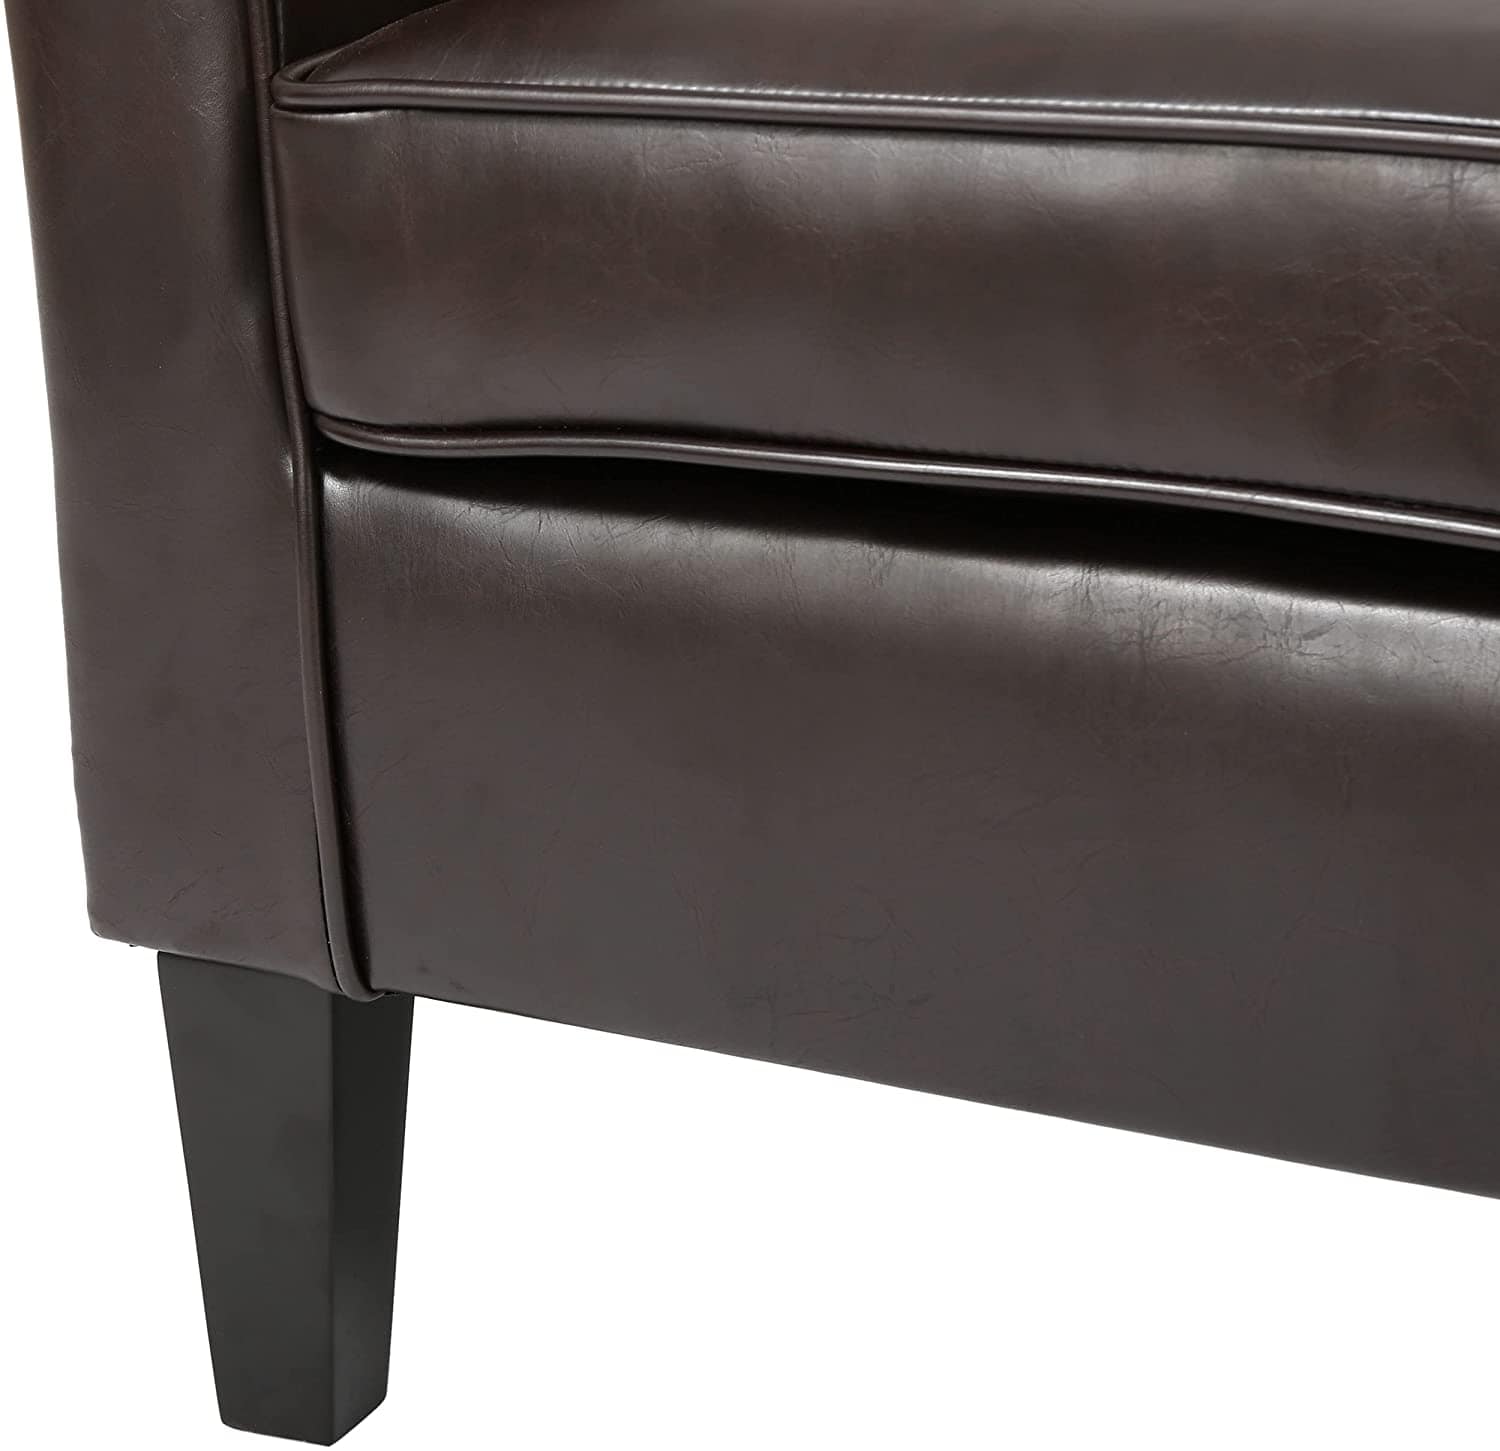 Logan Upholstered Club Chair with Arm Rest , Brown